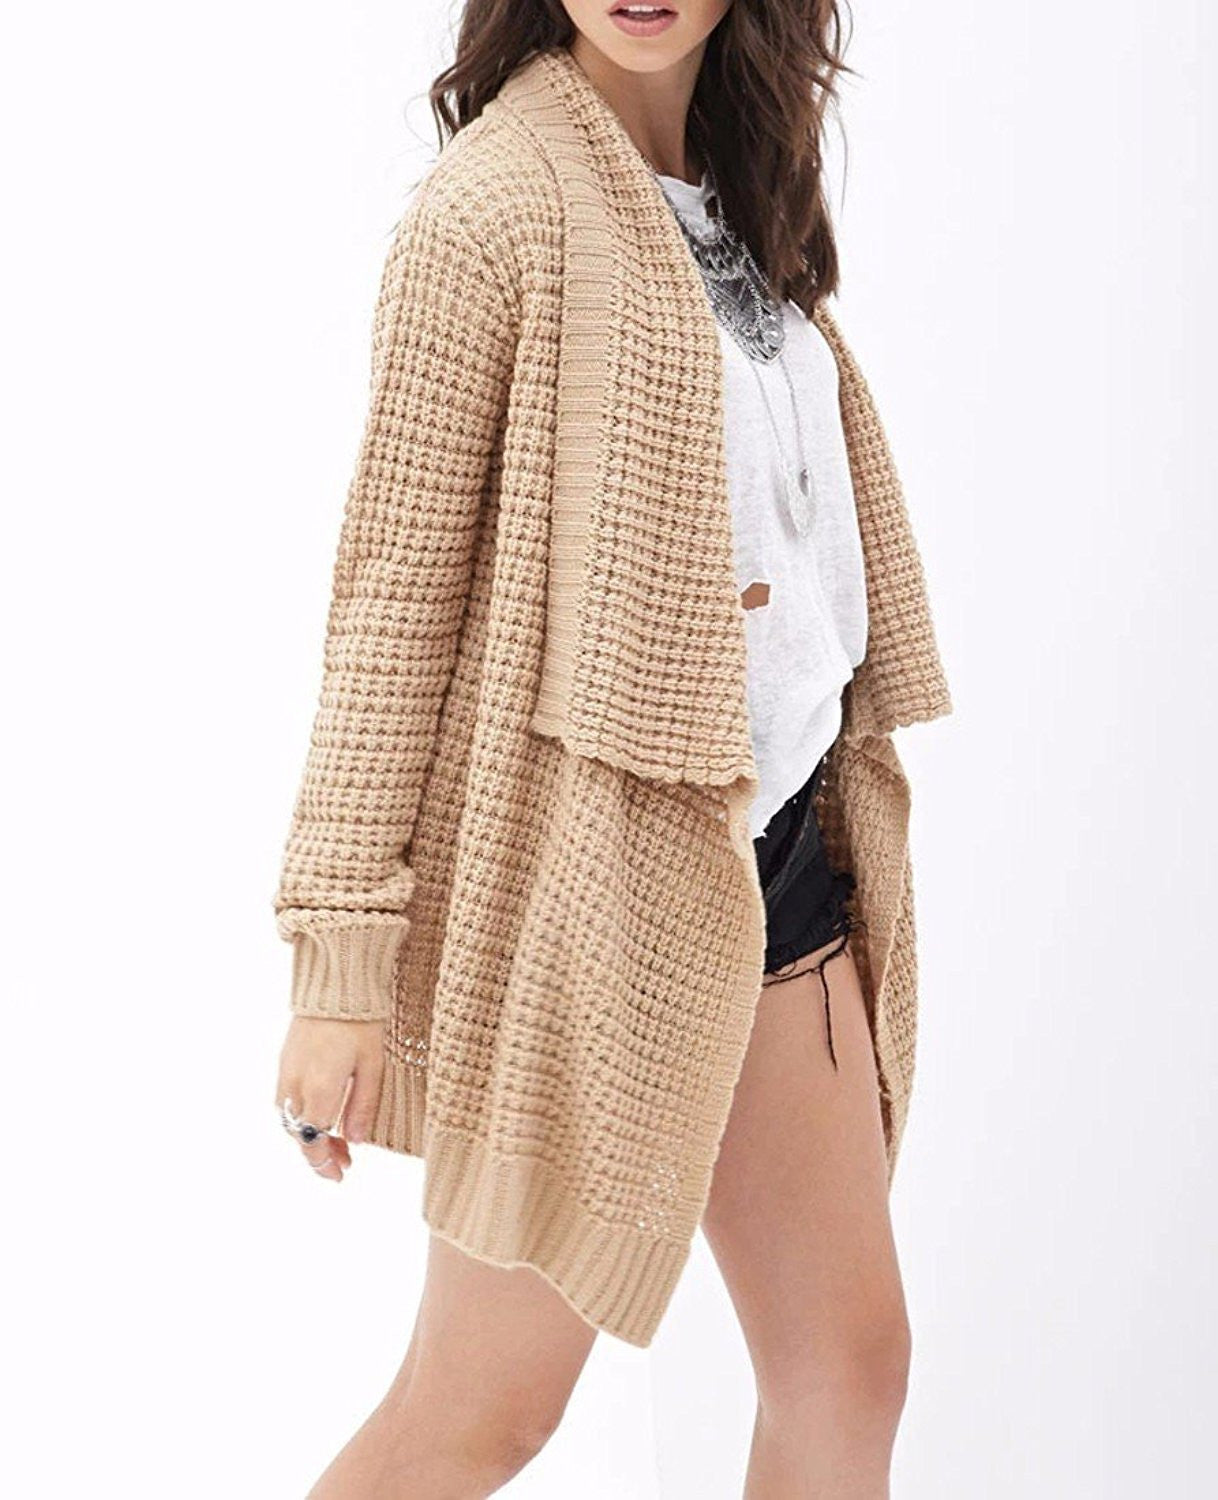 Leisure Hollow-Out Irregular Ladies Knitted Cardigan